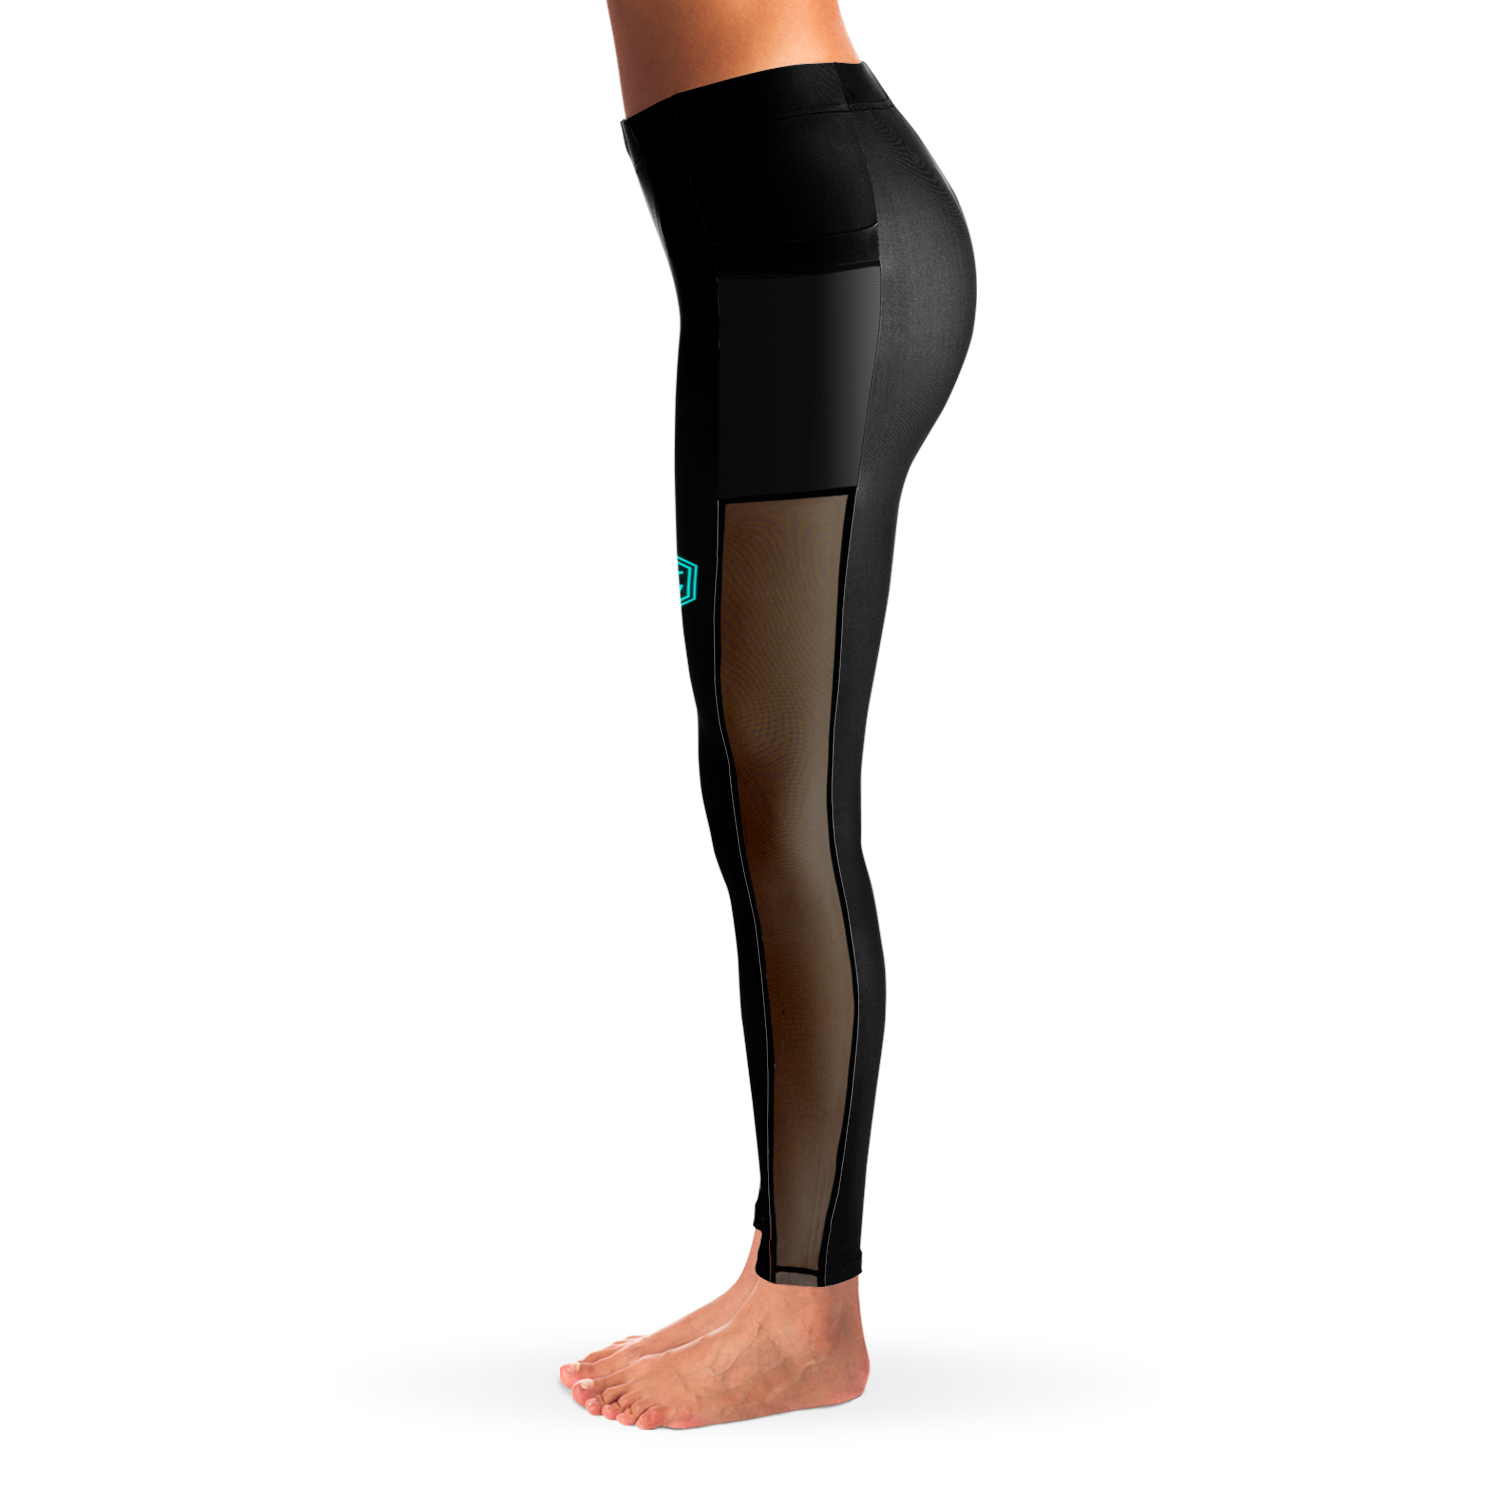 WRWC Everyday Glow Aura ~ 2022 Mesh Pocket Leggings - Who R We Collective